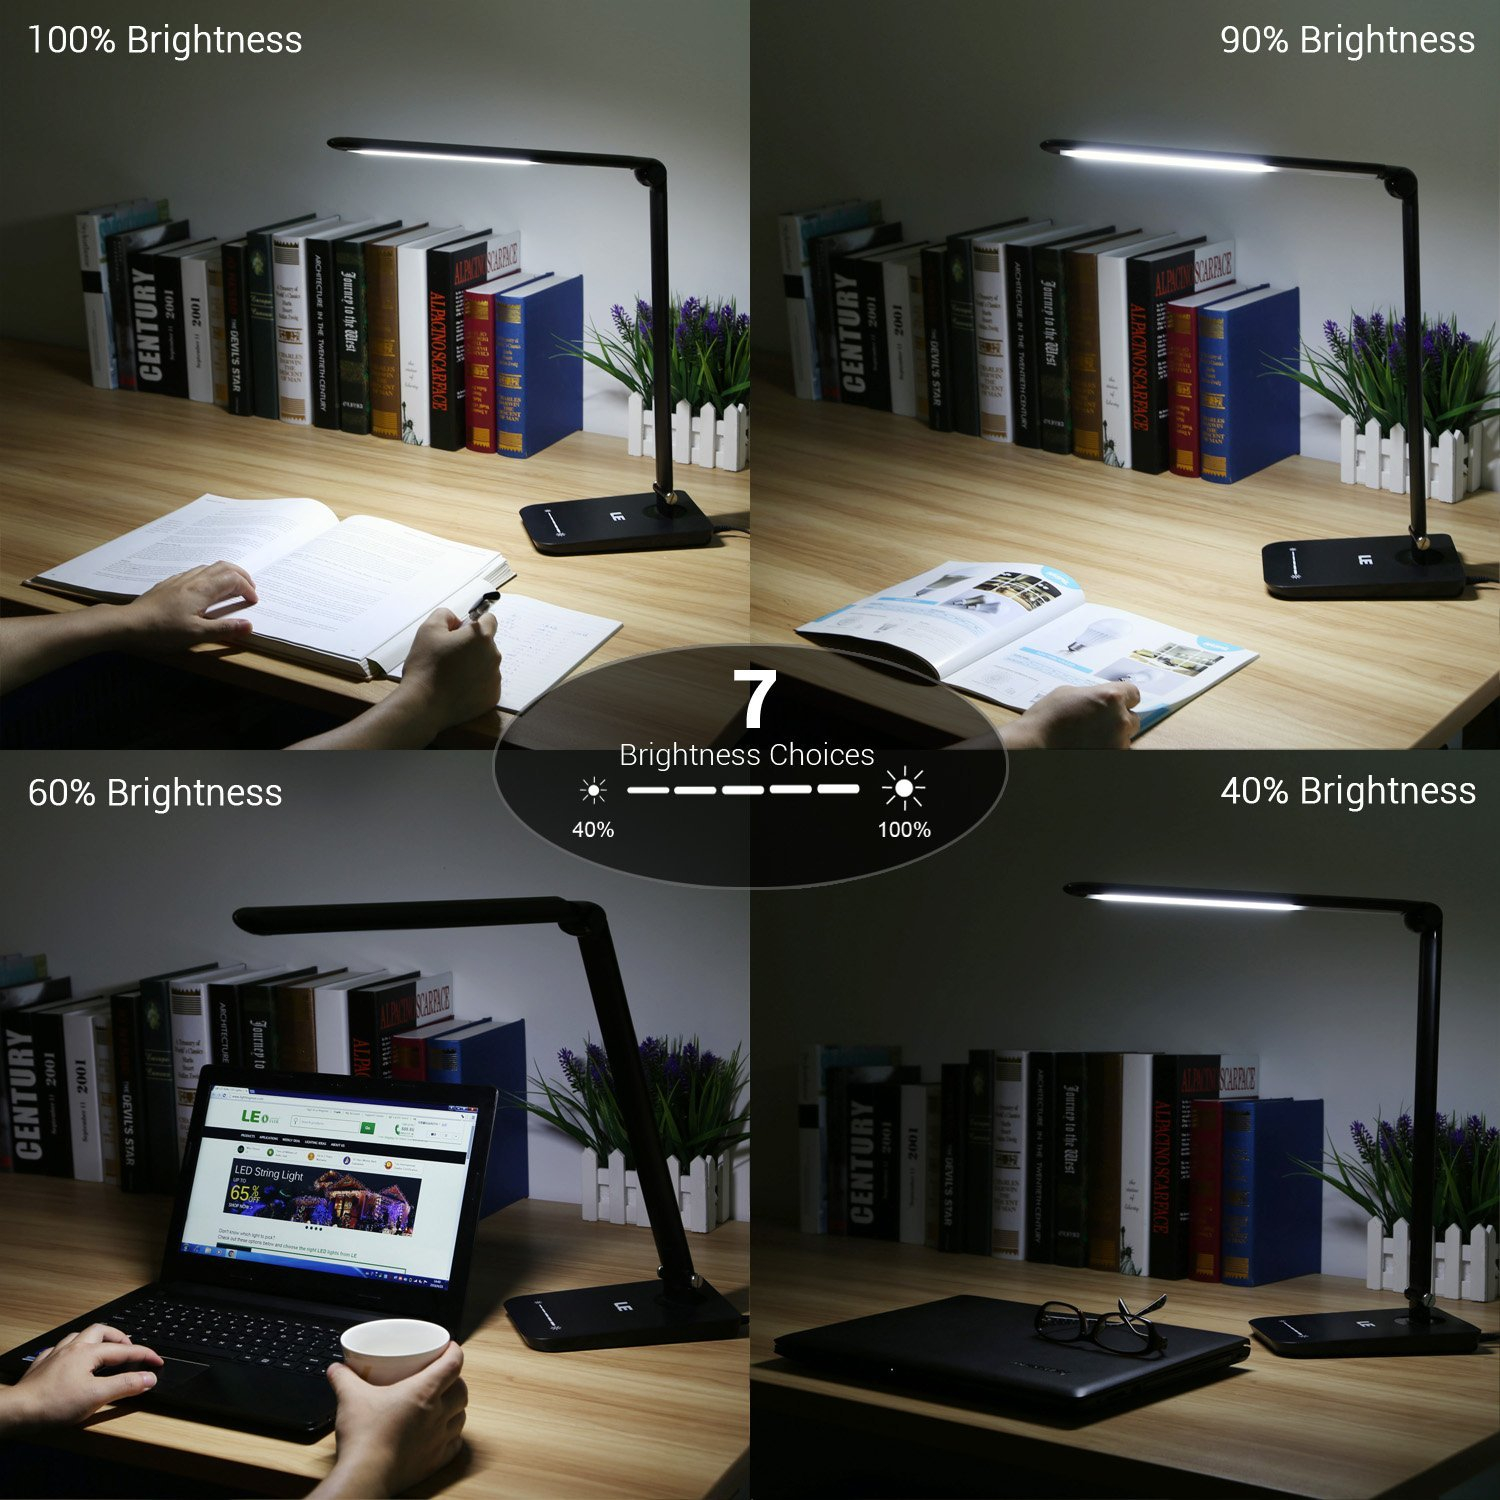 Finding The Best Desk Lamps For College Dorms Cafe Deutschland intended for sizing 1500 X 1500